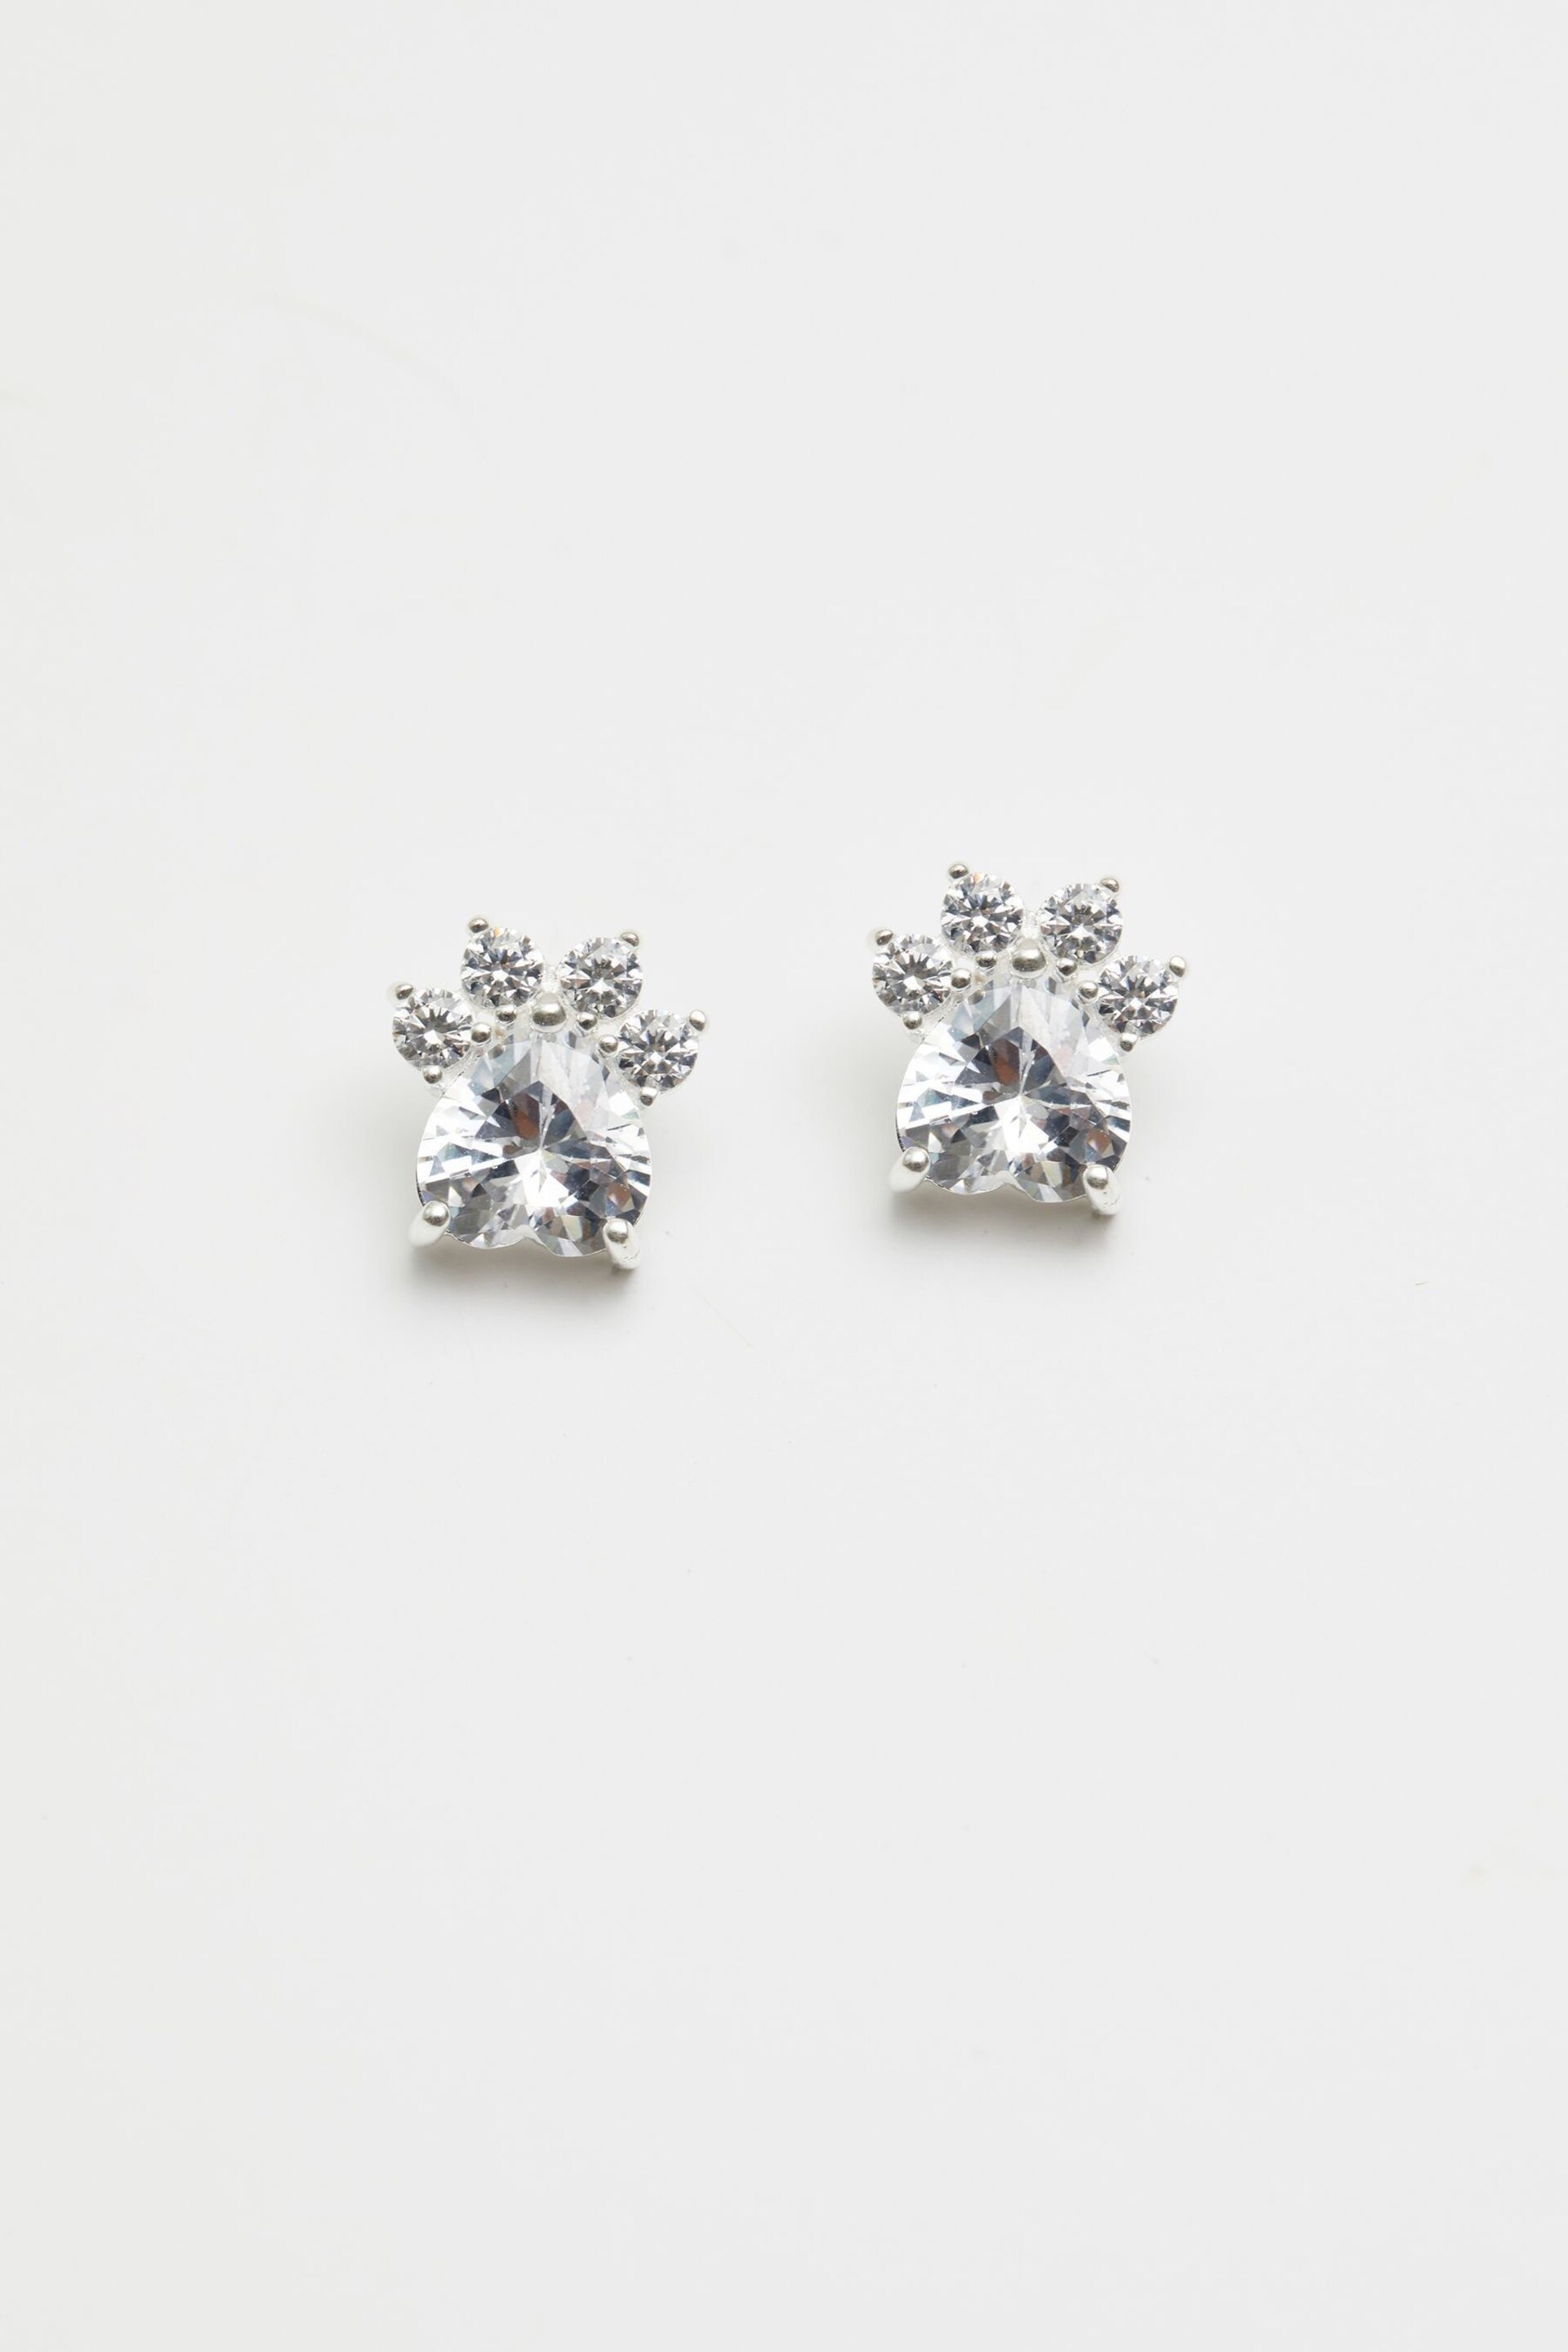 Simply Silver Sterling Silver 925 Paw Print Cubic Zirconia Earrings - Image 1 of 3